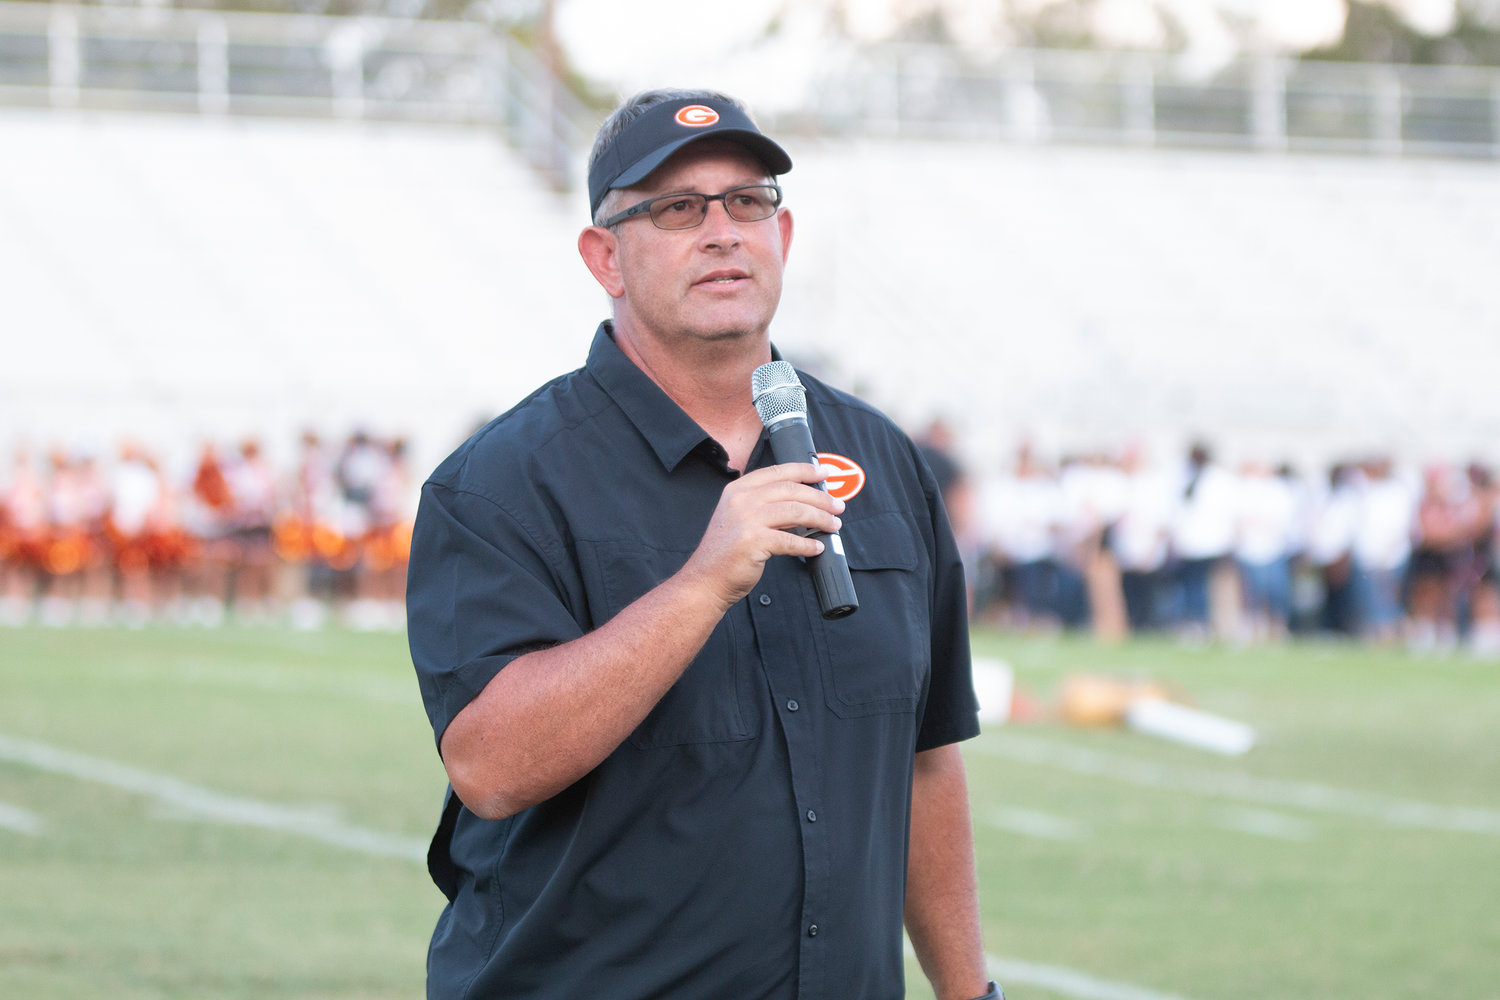 Gonzales head football coach Mike Waldie thanked the community for their ongoing support of the Gonzales Apaches program last week at the pep rally.